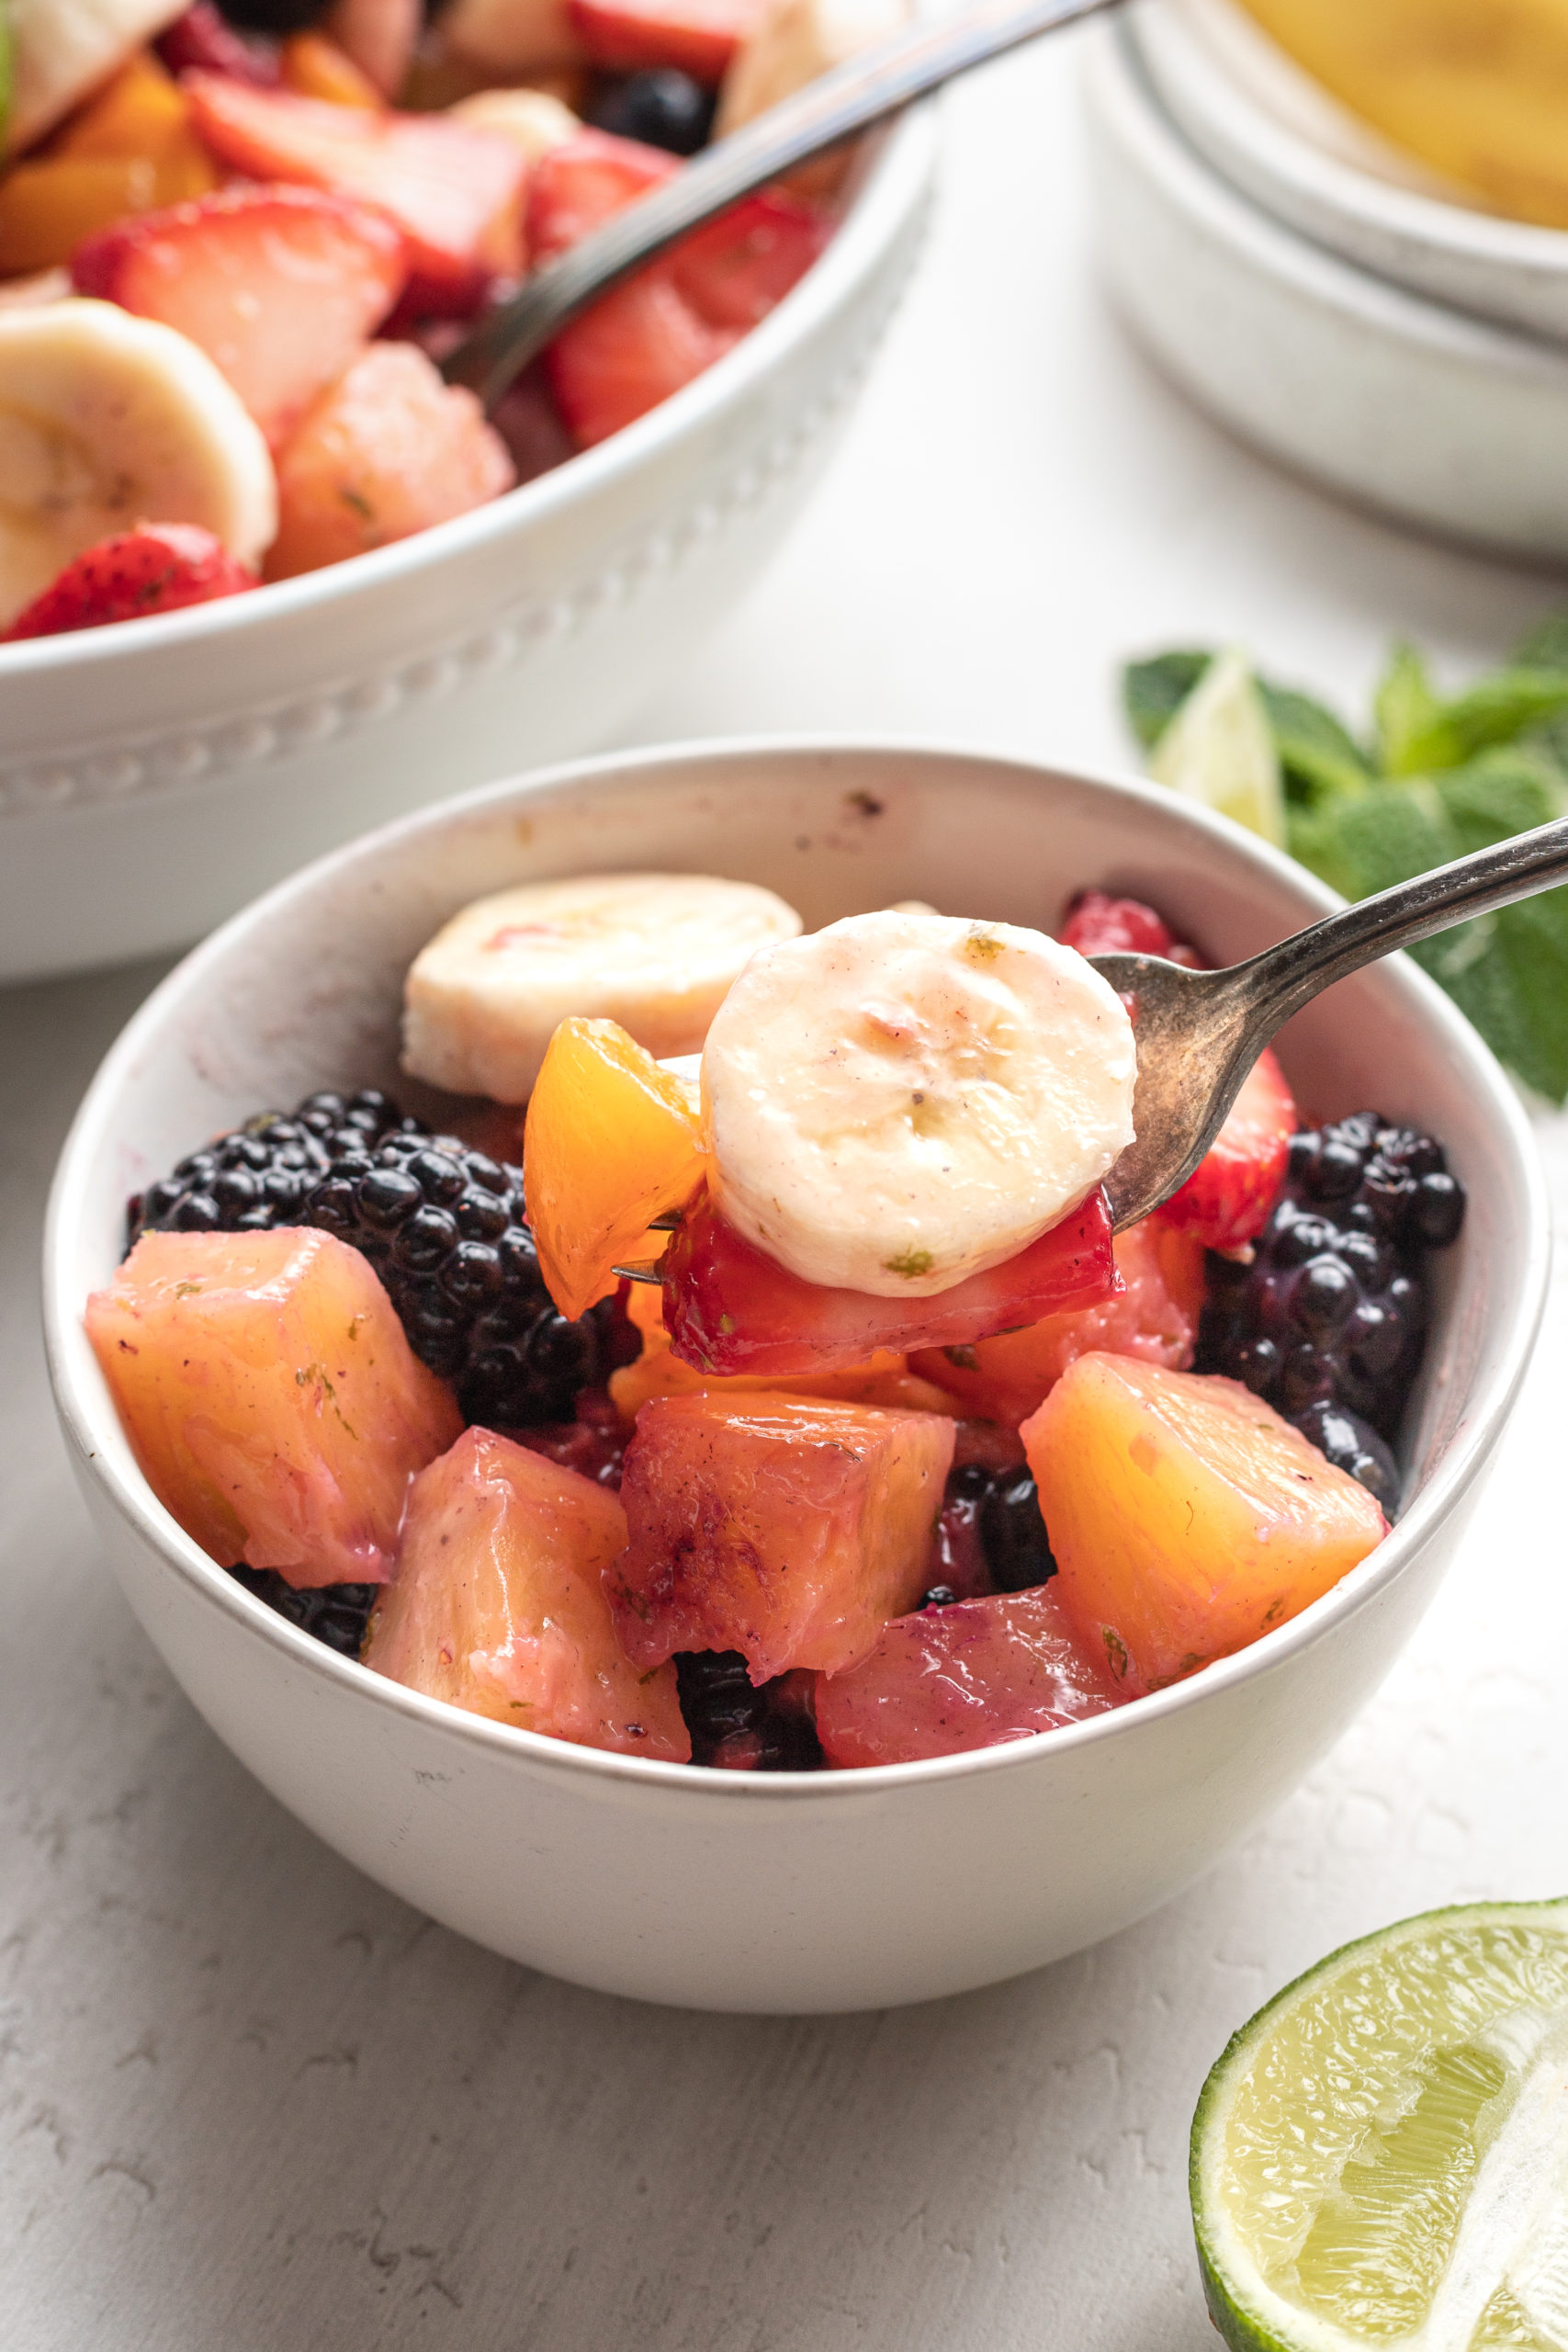 fruit salad in a white bowl